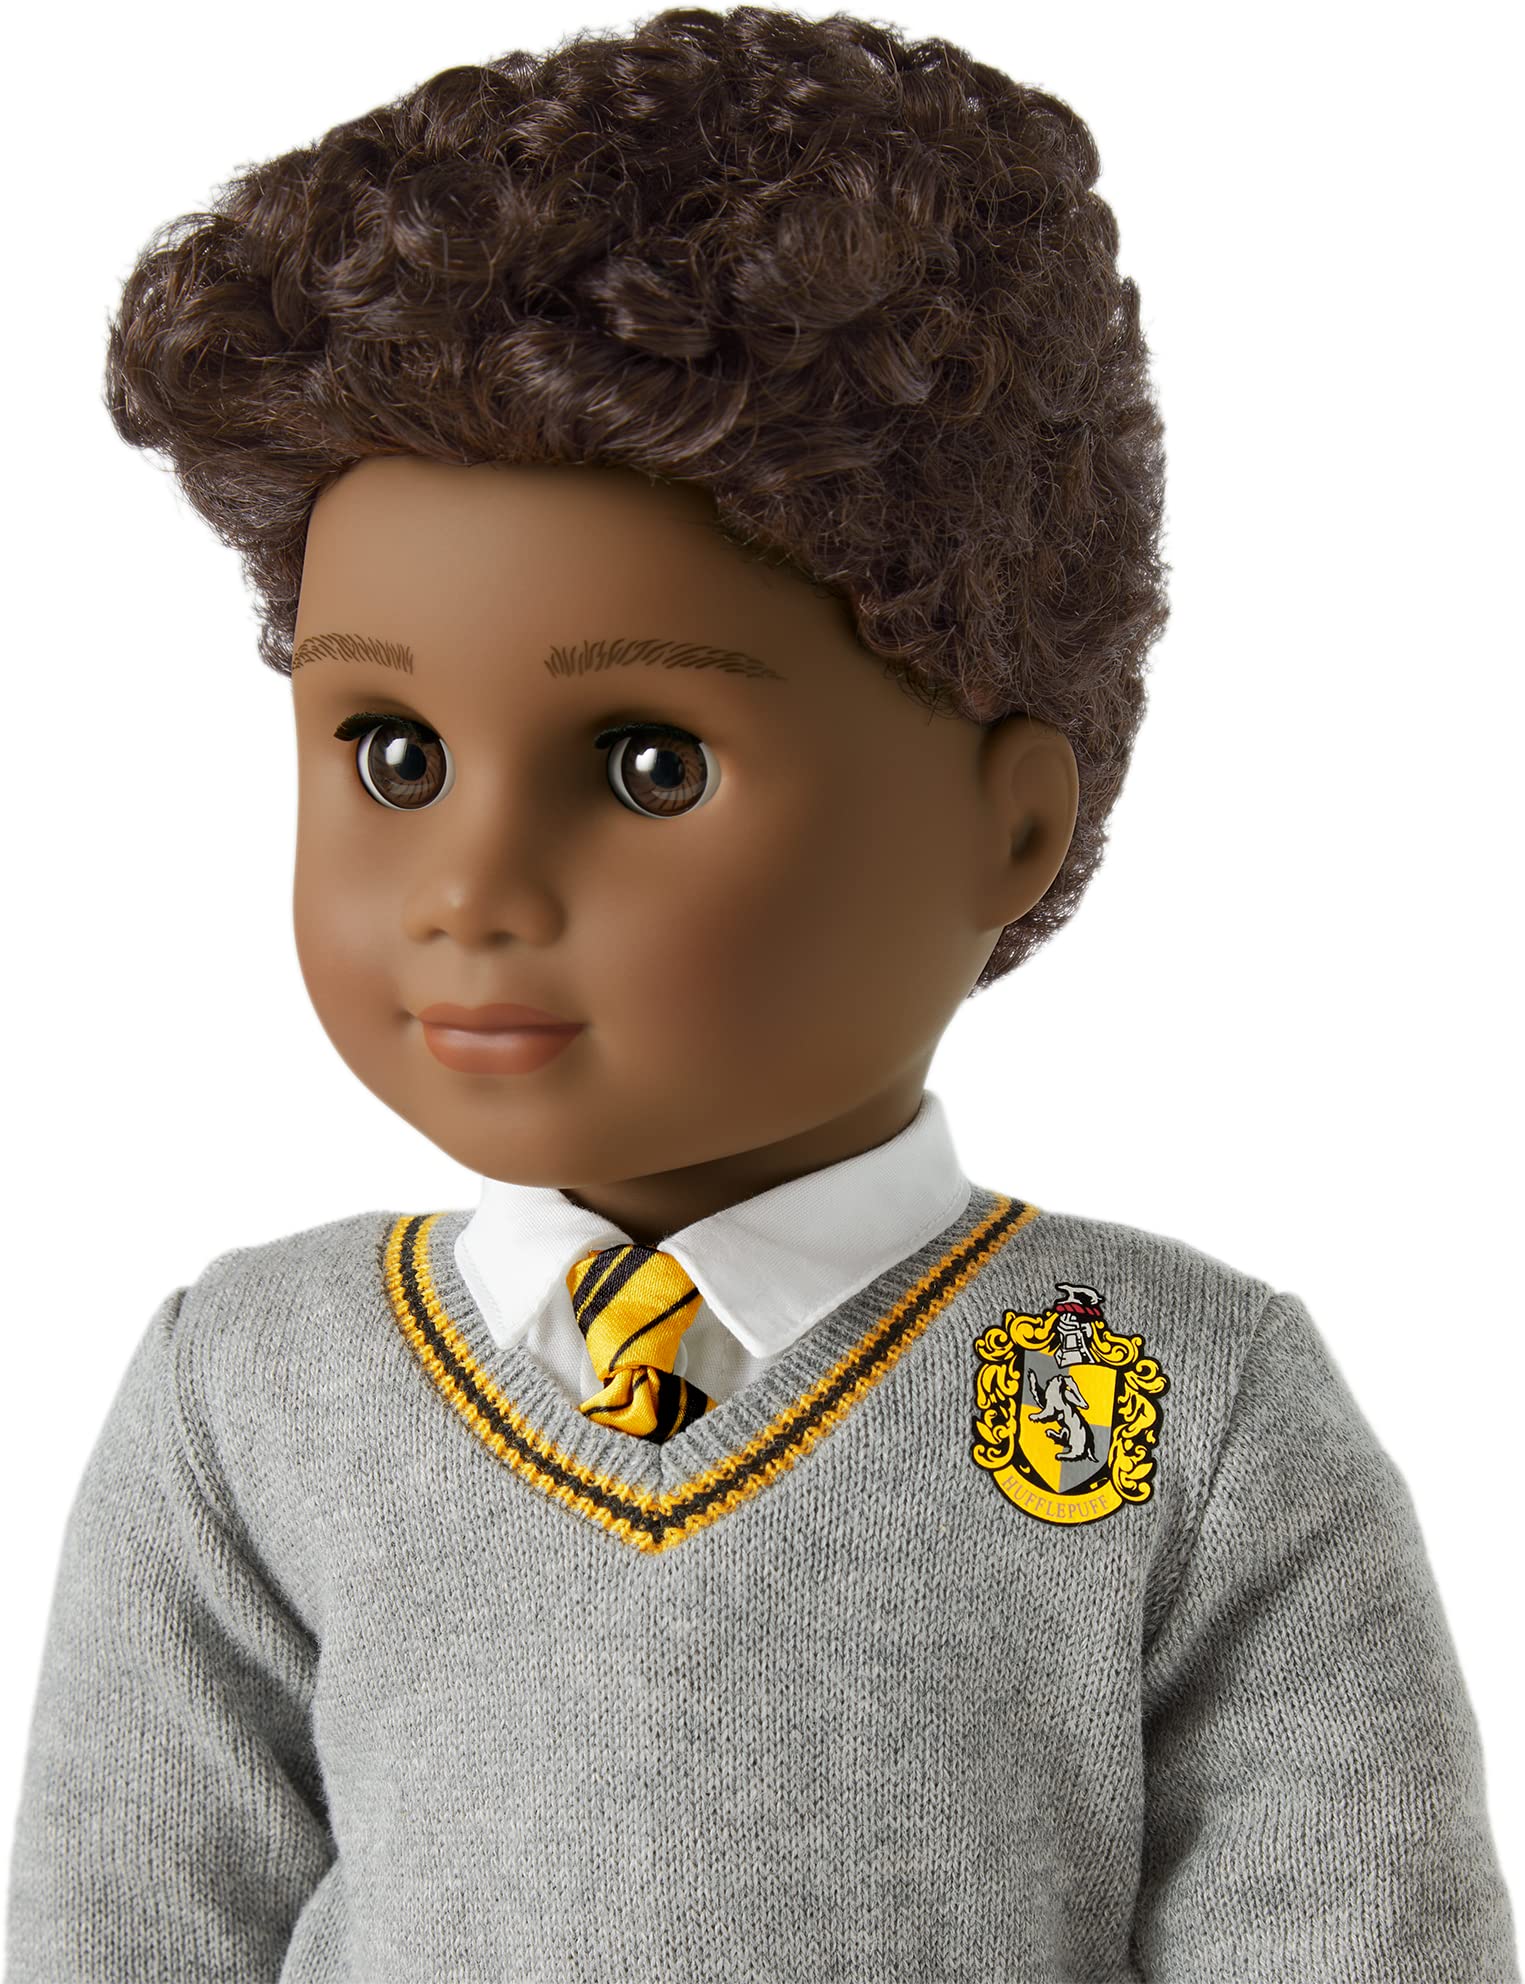 American Girl Harry Potter 18-inch Doll Hufflepuff Outfit with Sweater and Scarf Featuring House Crest, For Ages 6+